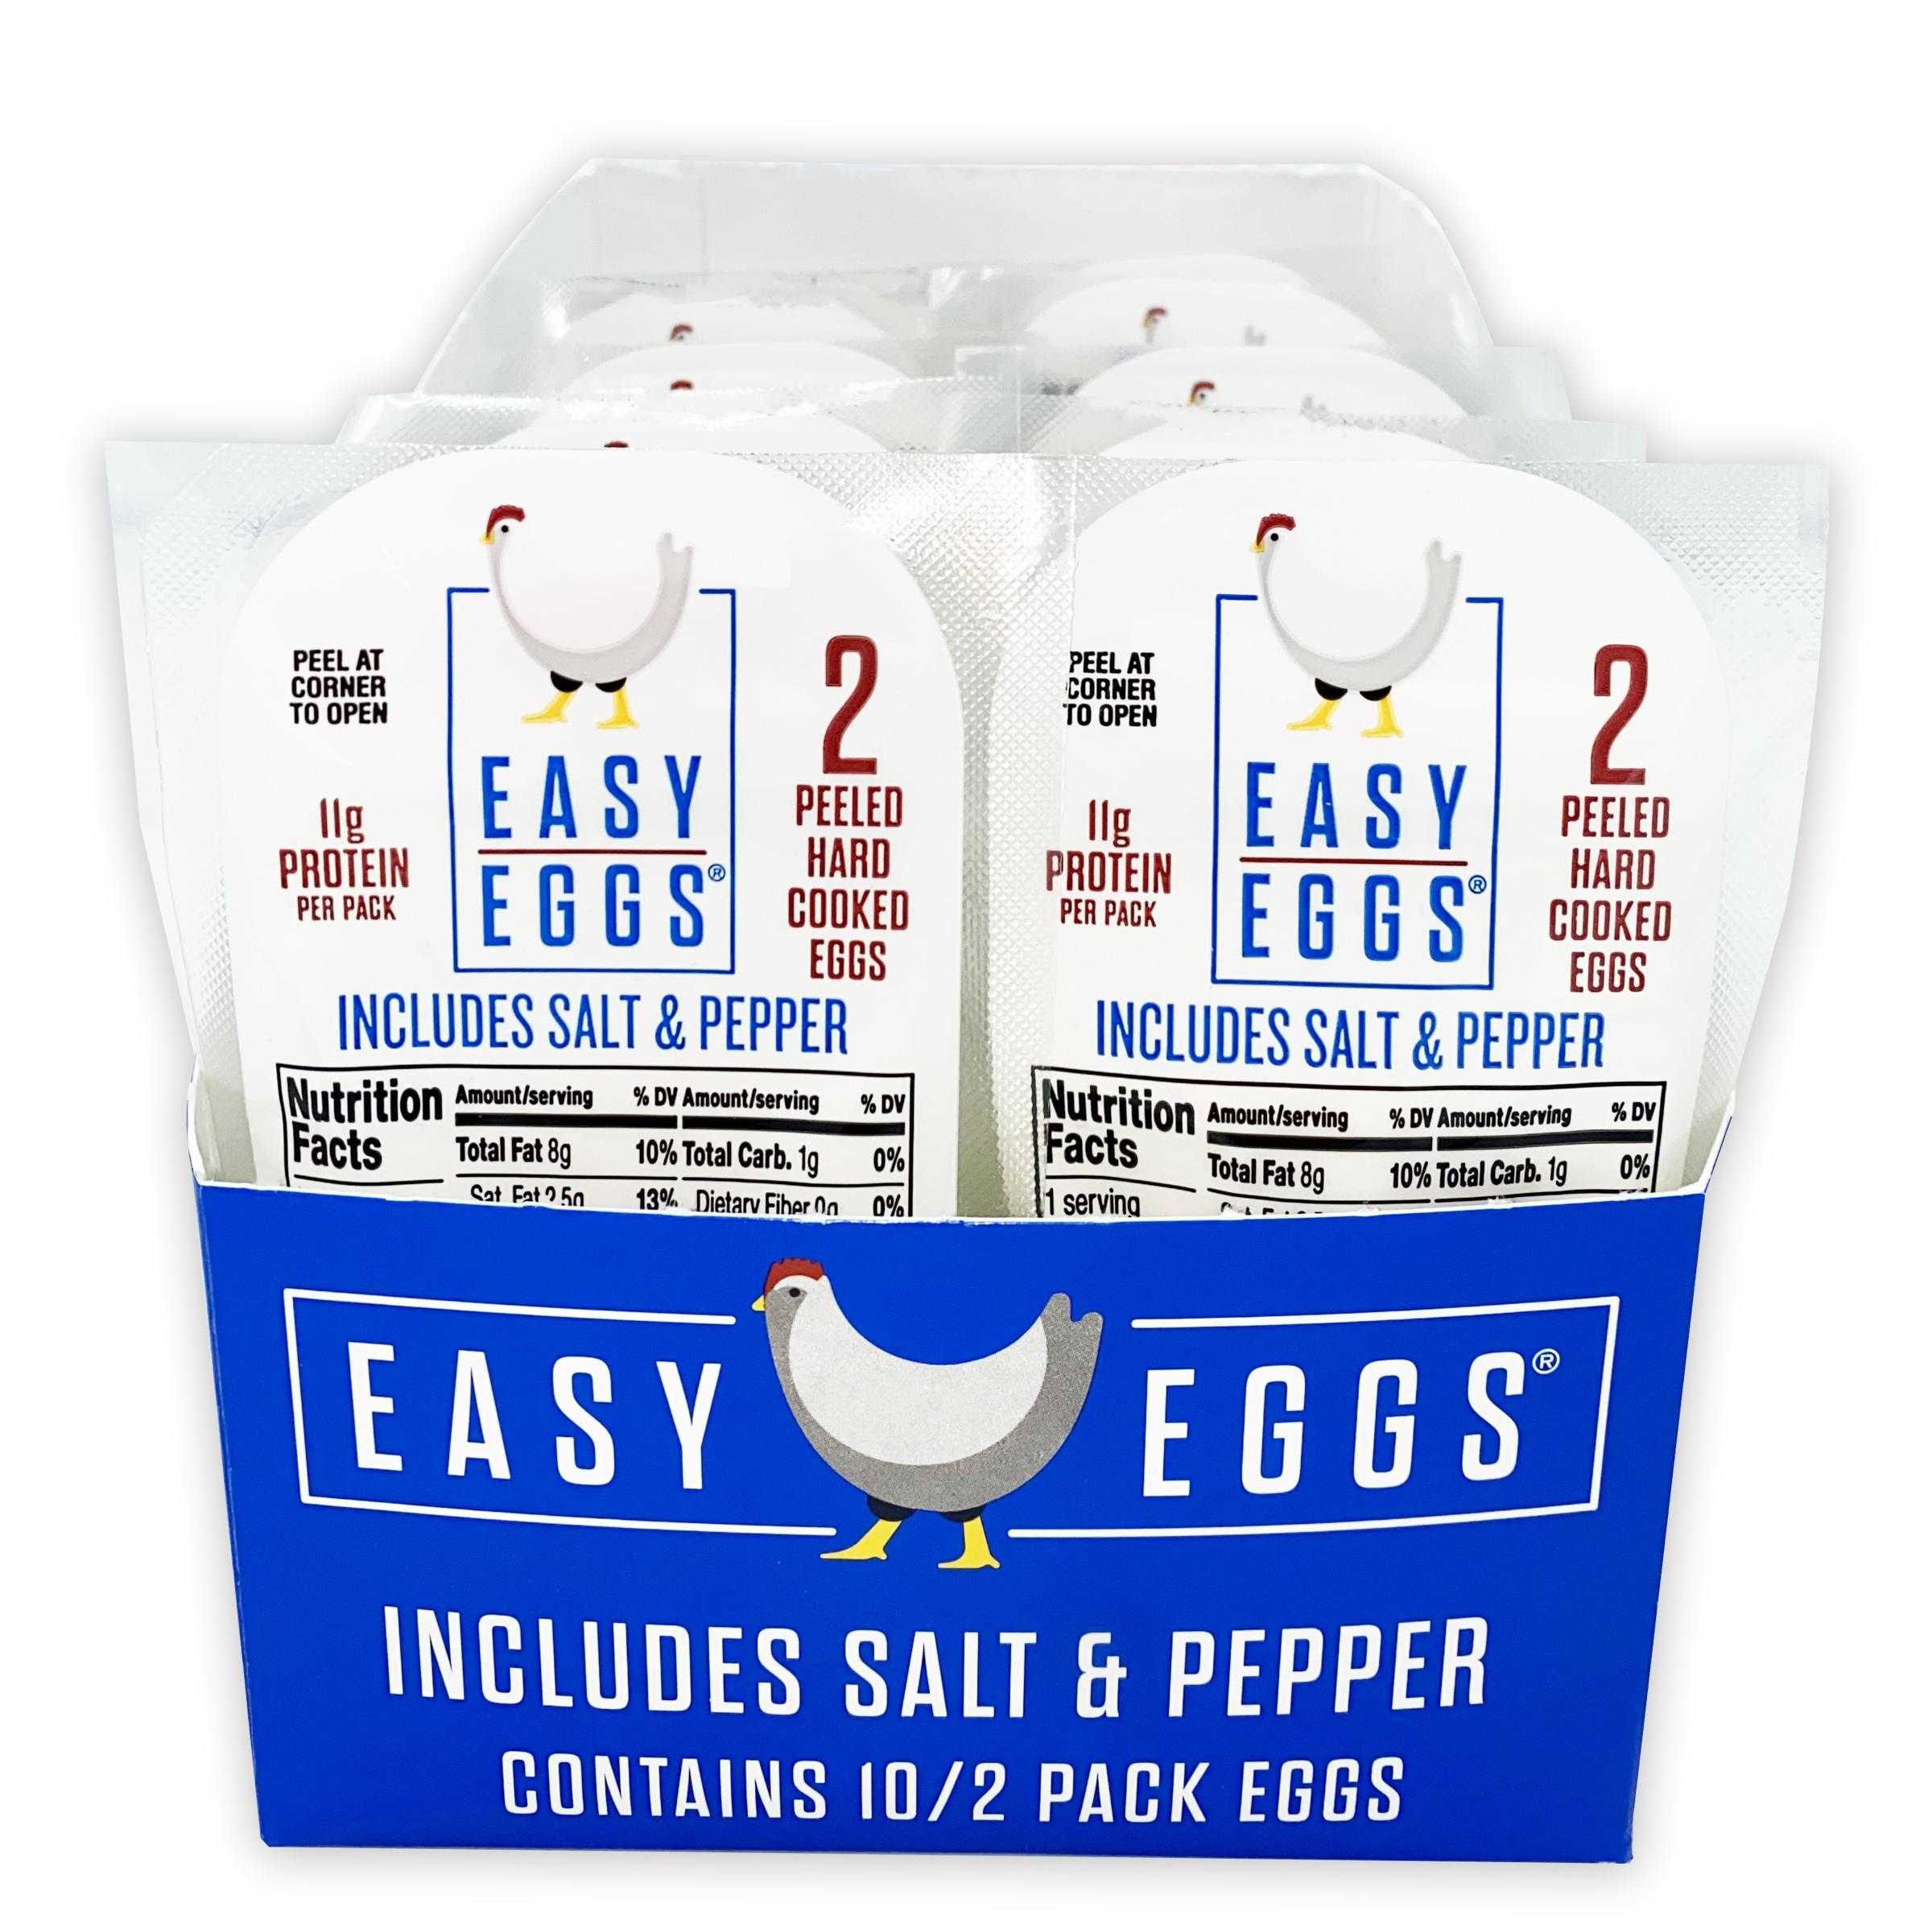 Easy Eggs® Peeled Hard Cooked Eggs with Salt & Pepper, 2 Retail Trays with 10-2 Count Grab ‘N Go Dry Packs